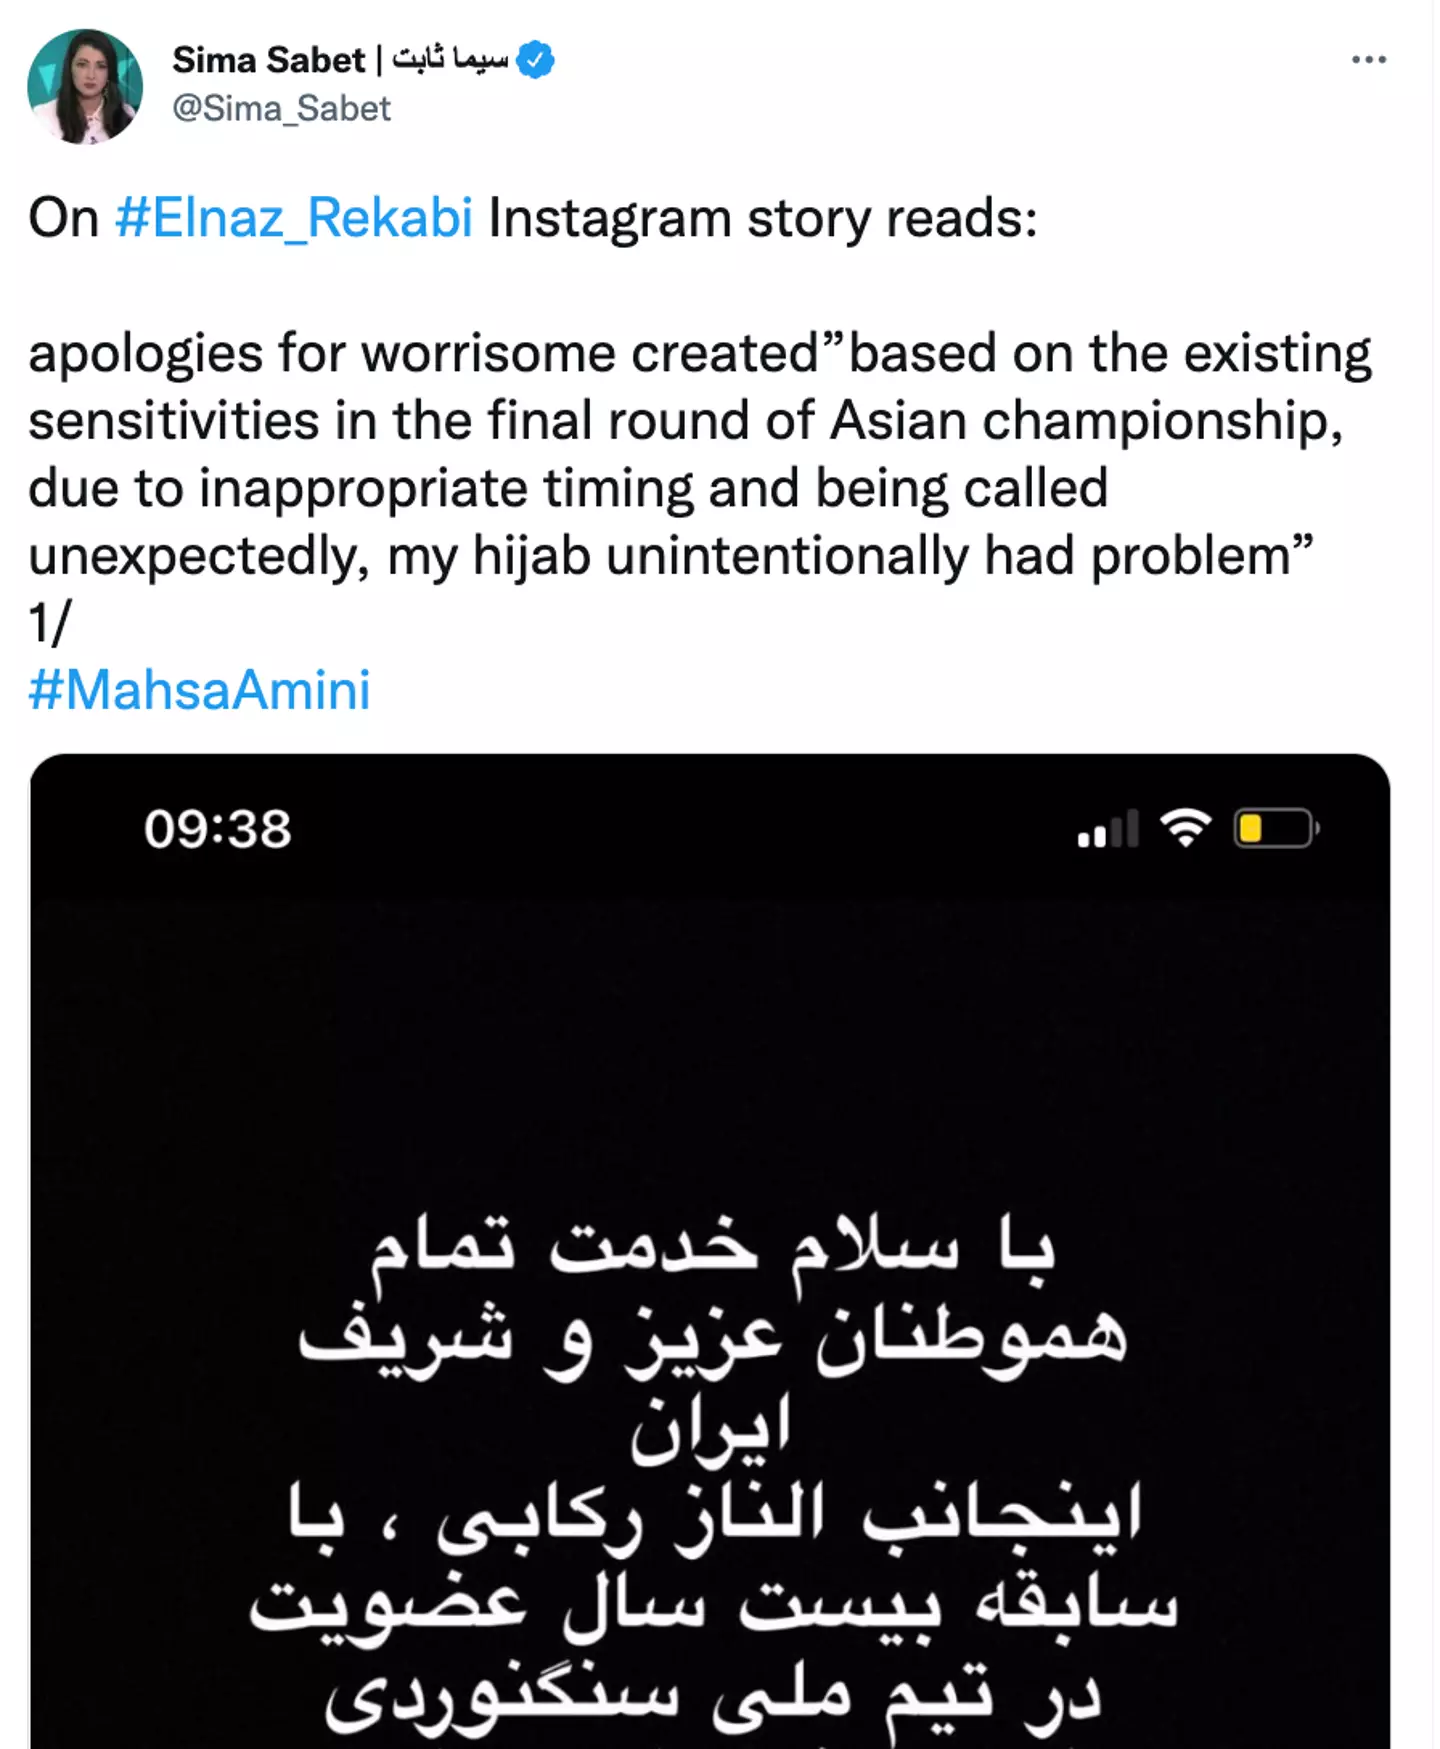 Rekabi appeared to share an update on her Instagram story.